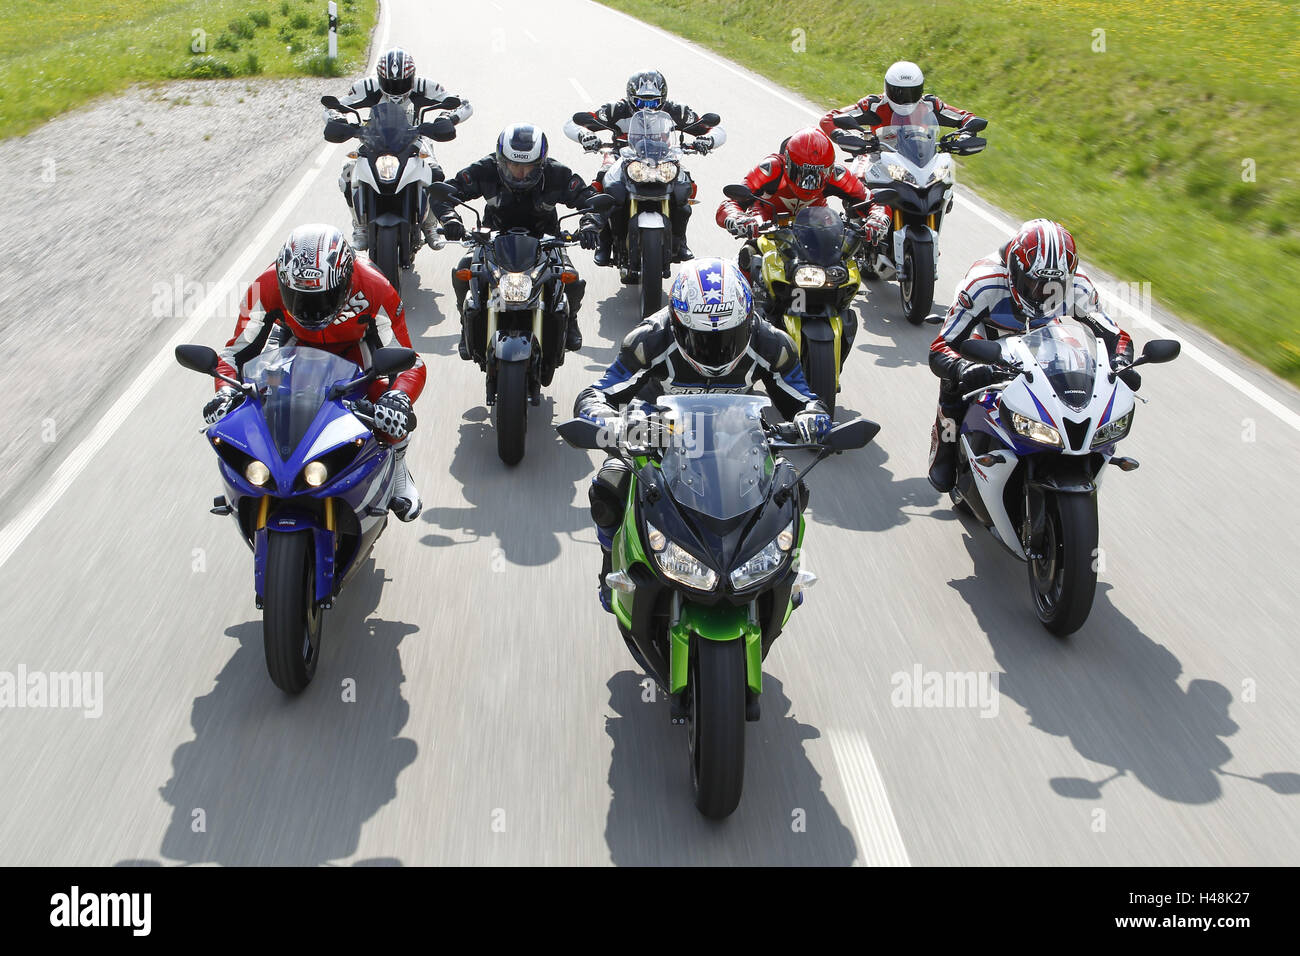 eight motorcyclists, country road, motorcycle group, sports motorcycles, Stock Photo